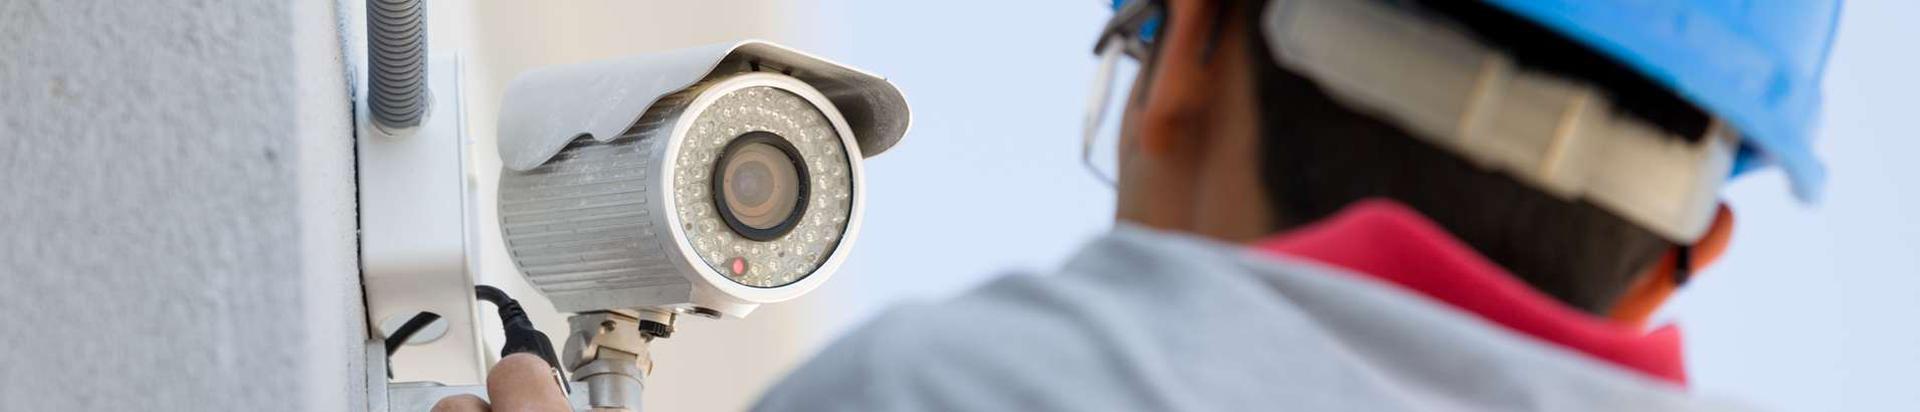 security and surveillance services, security and surveillance equipment, fire safety, Design, construction and maintenance of fire safety